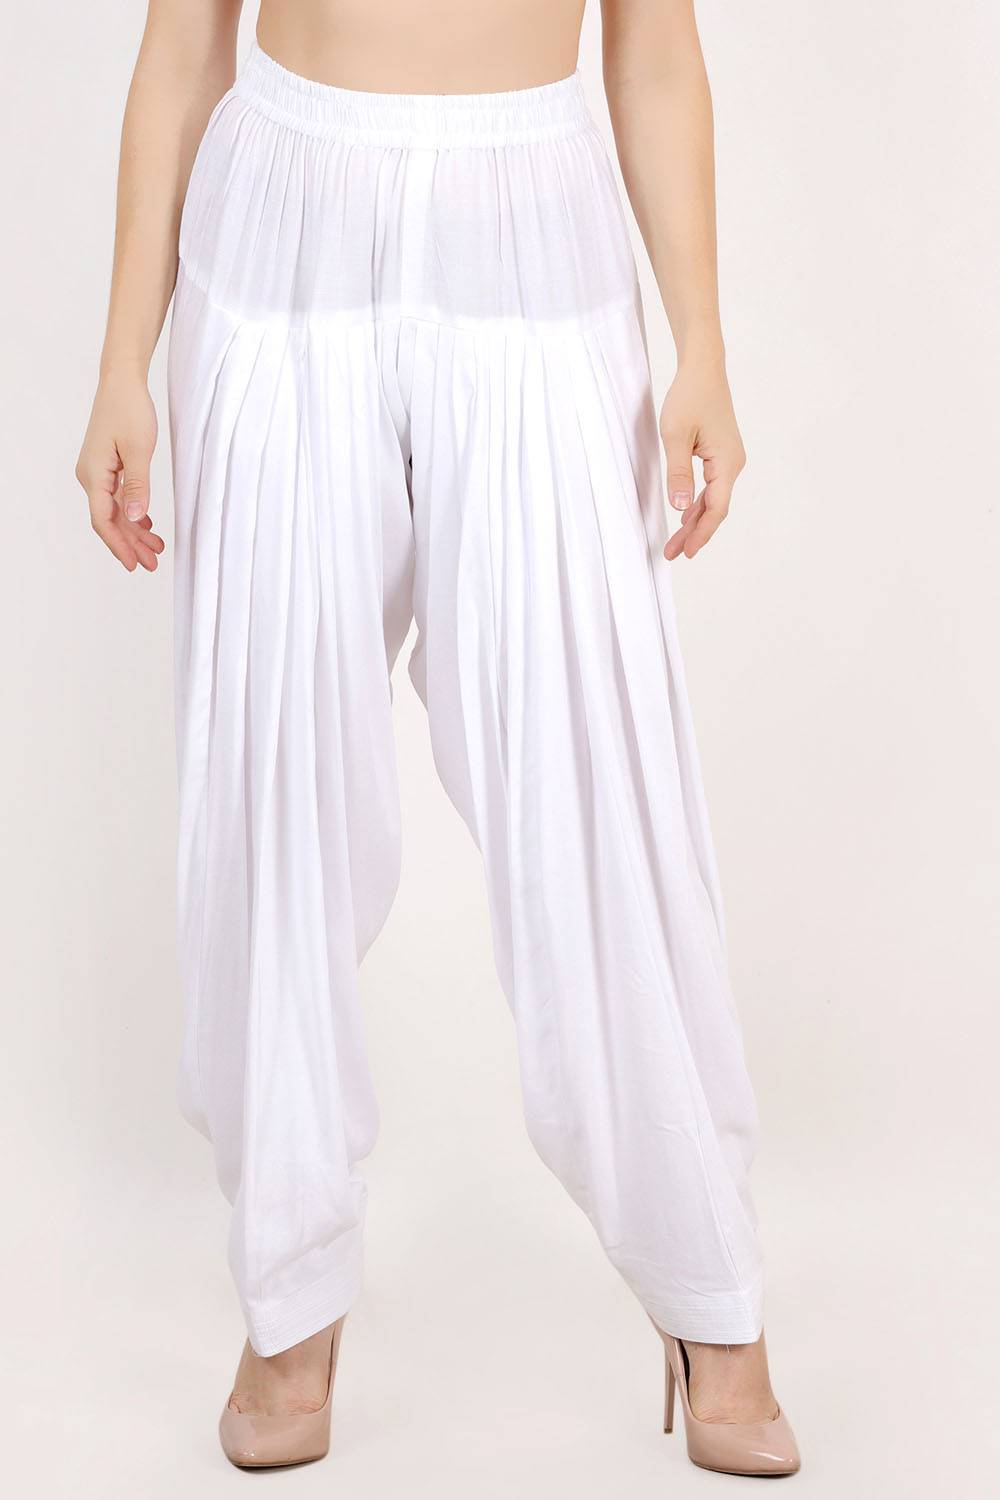 Buy Jcss Patiala Pant with Elasticated Waist at Redfynd